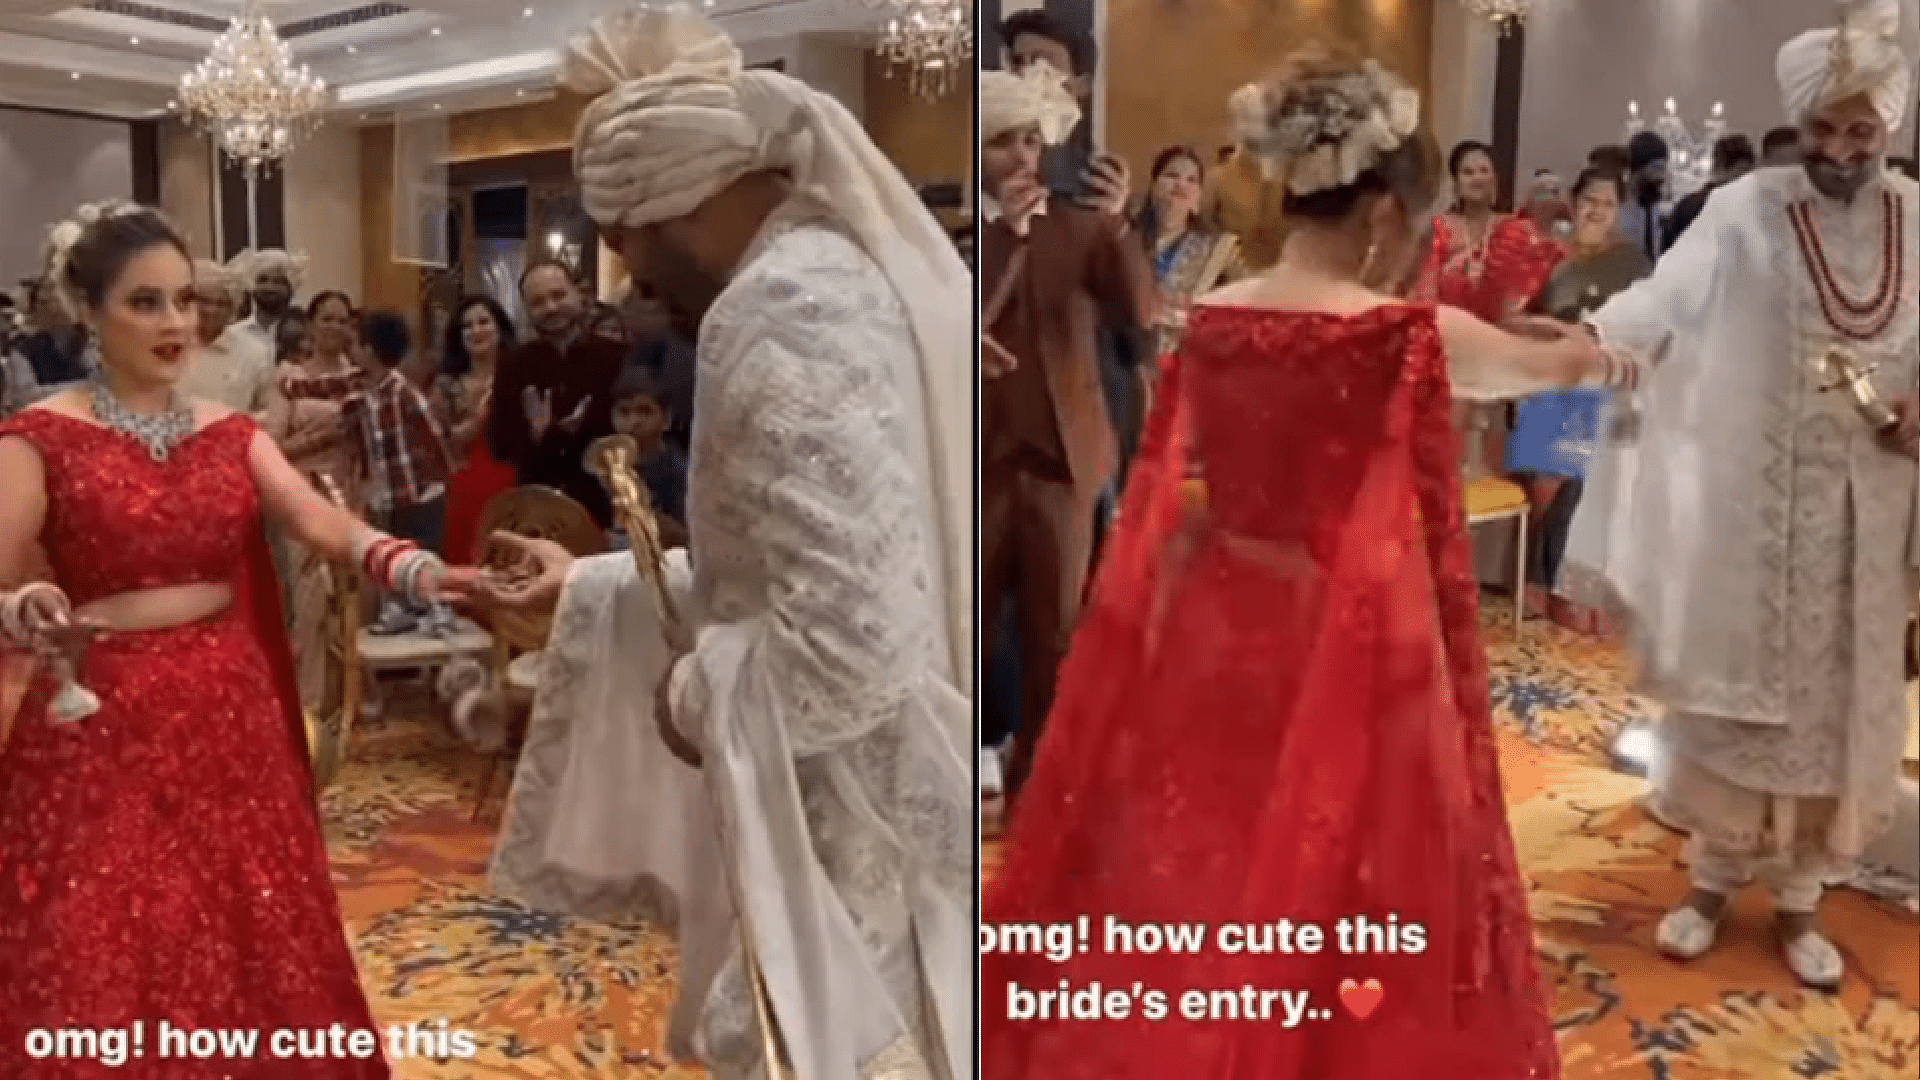 The bride took such an entry groom sat down on his knees